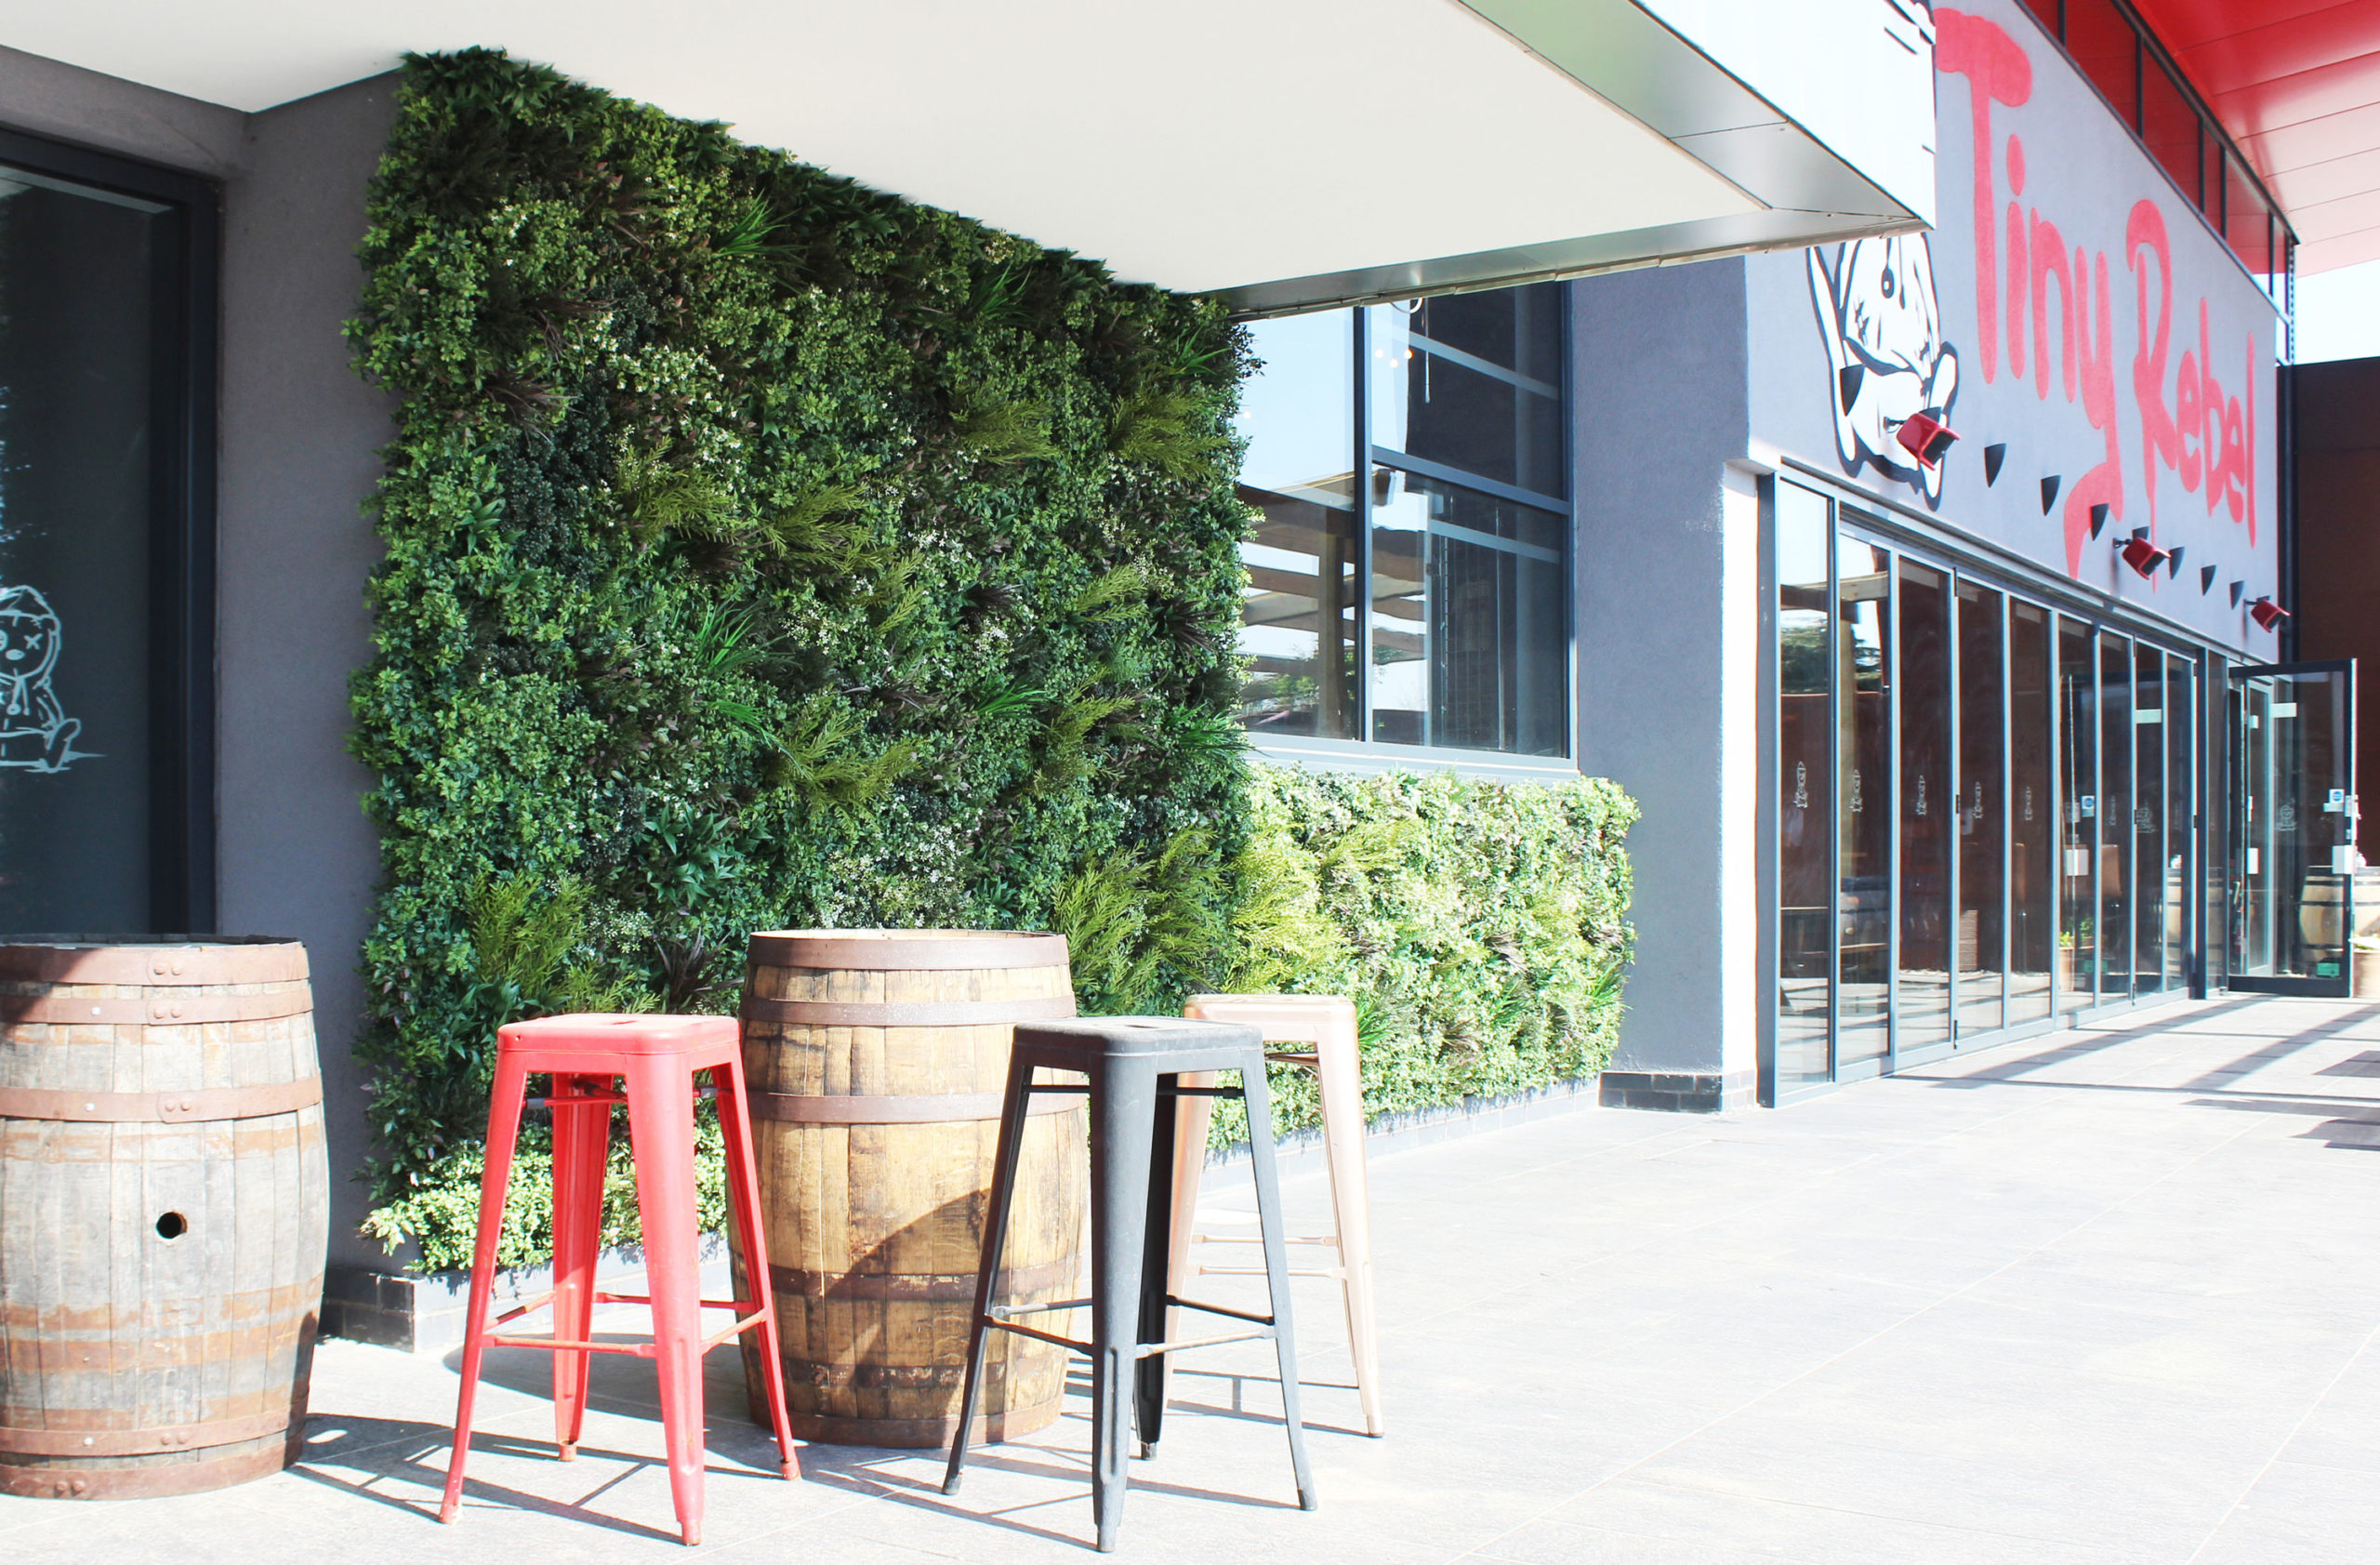 Artificial mixed planting for a trendy Newport brewery bar